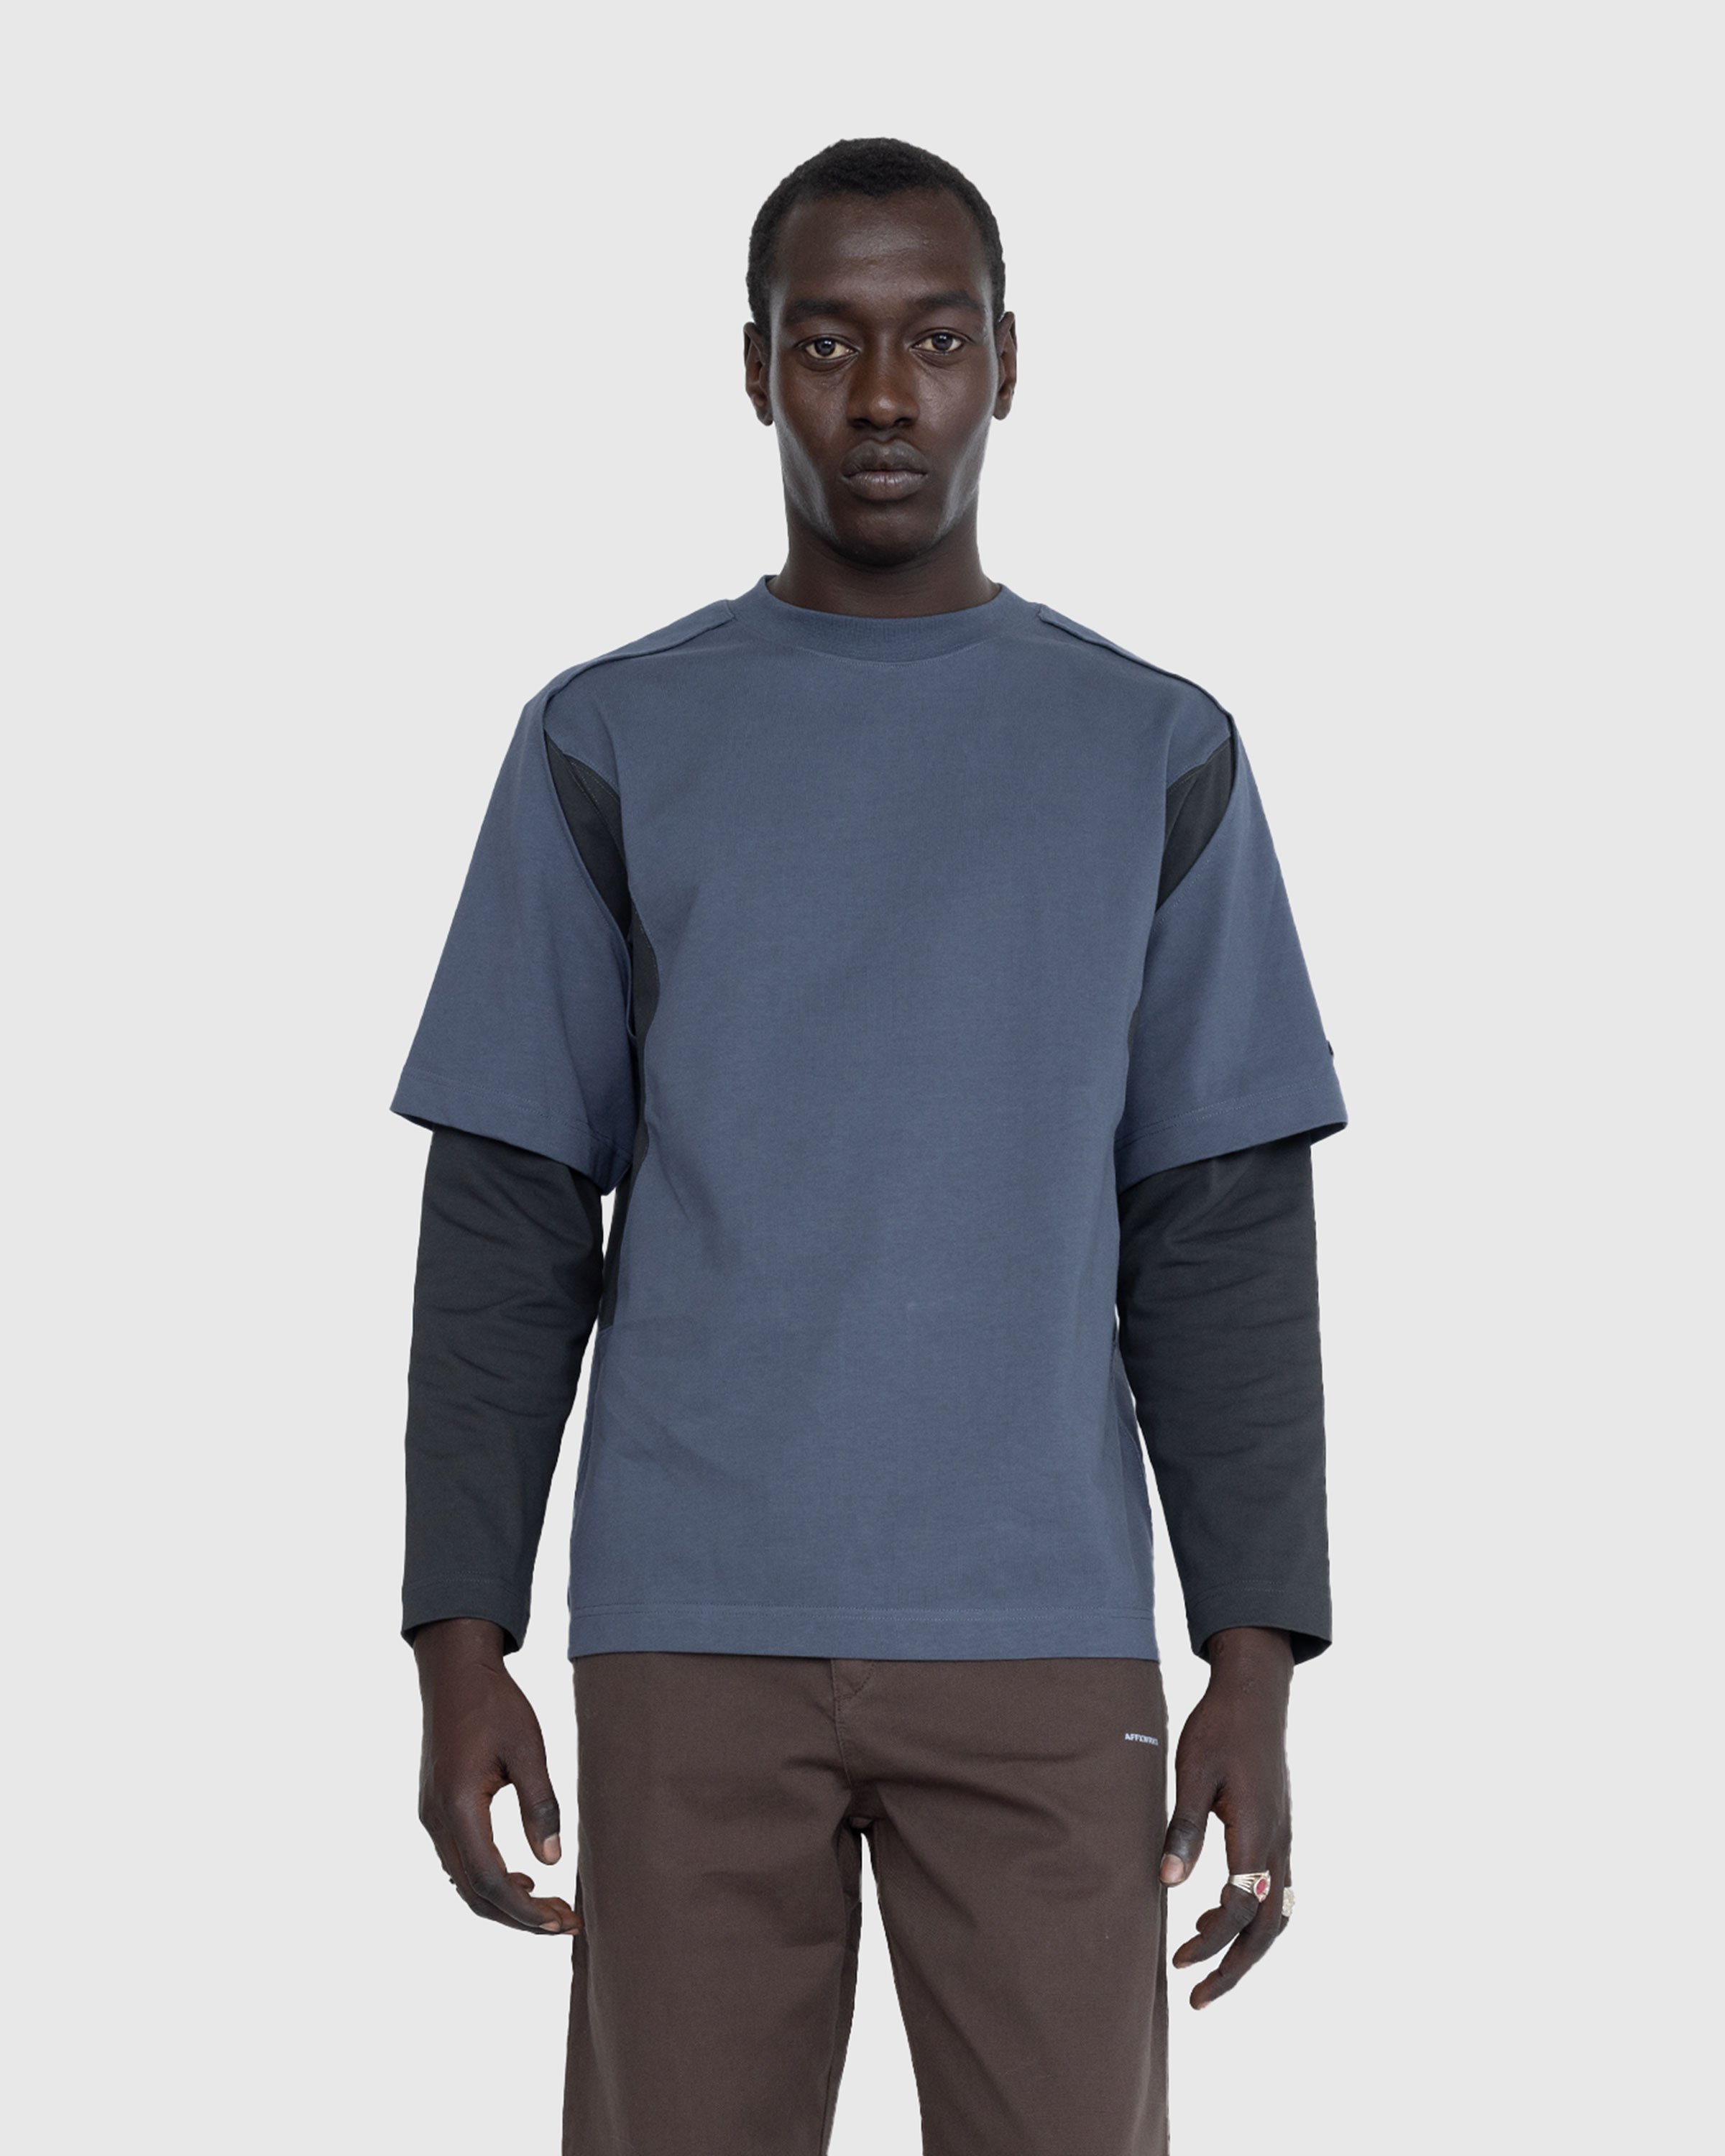 AFFXWRKS - Dual Sleeve T-Shirt Muted Blue - Clothing - Blue - Image 2